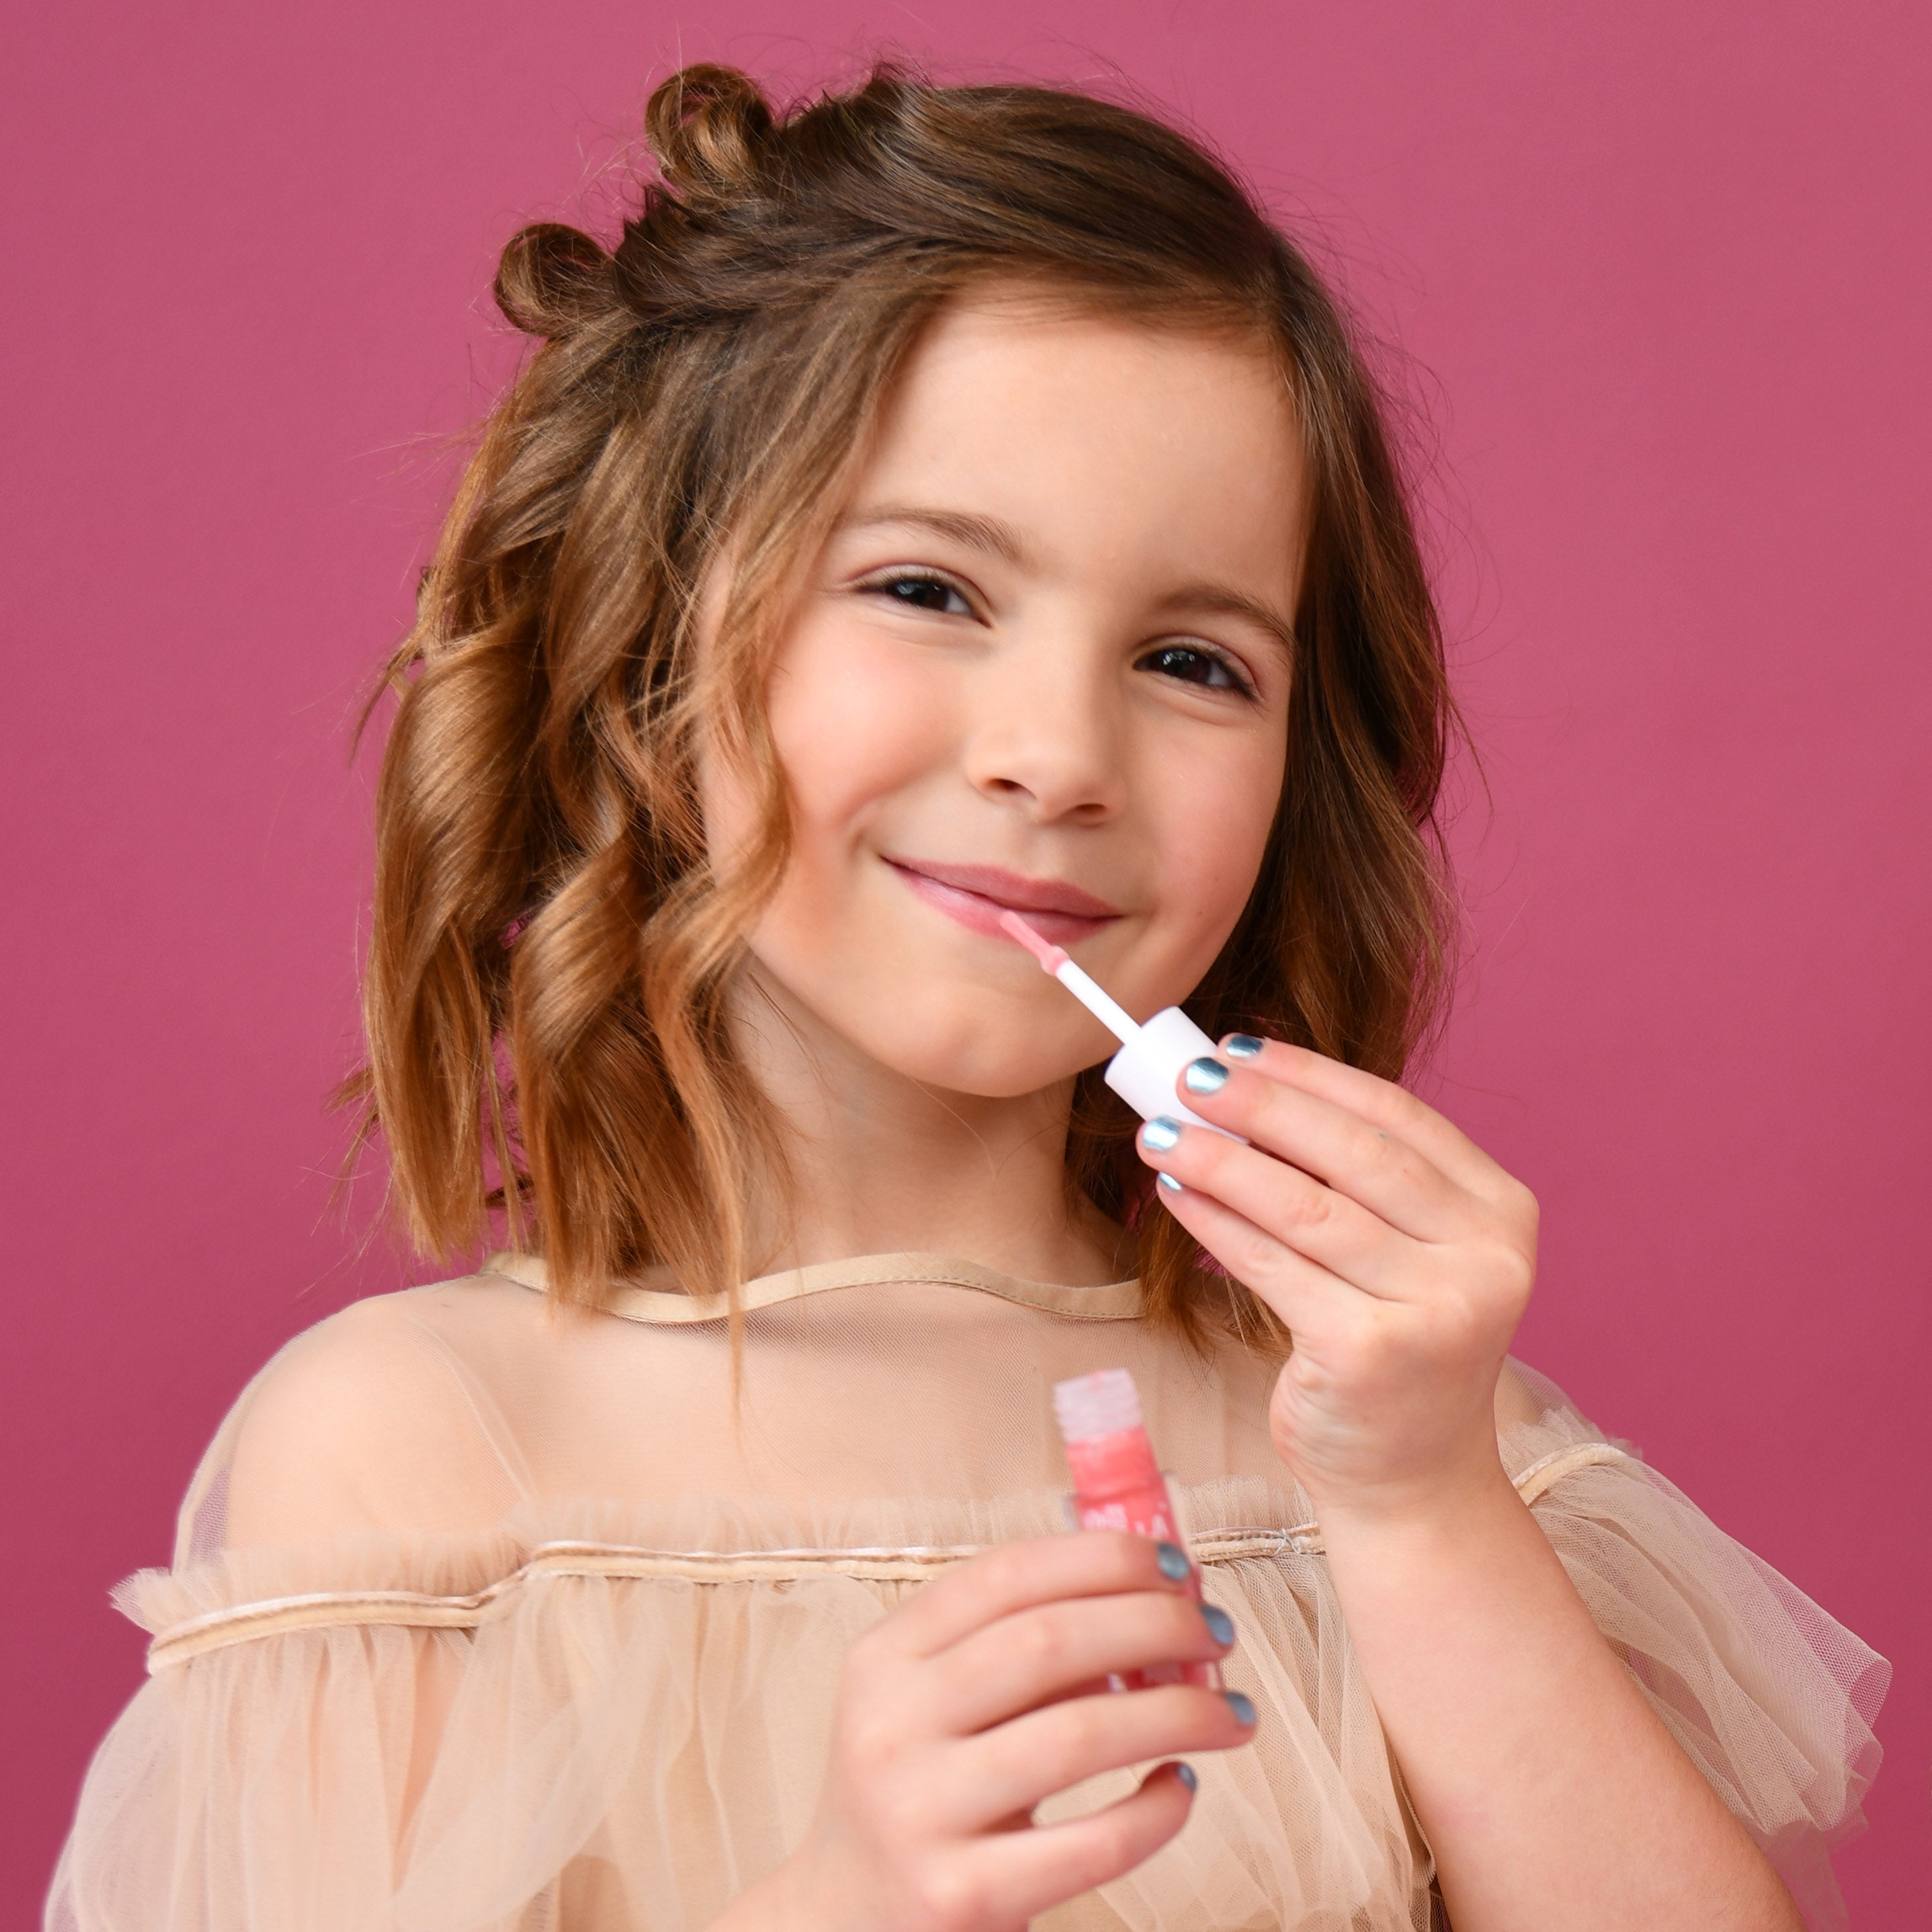 Liplicious and Hydrating Kids' Lip Gloss Collection Kit